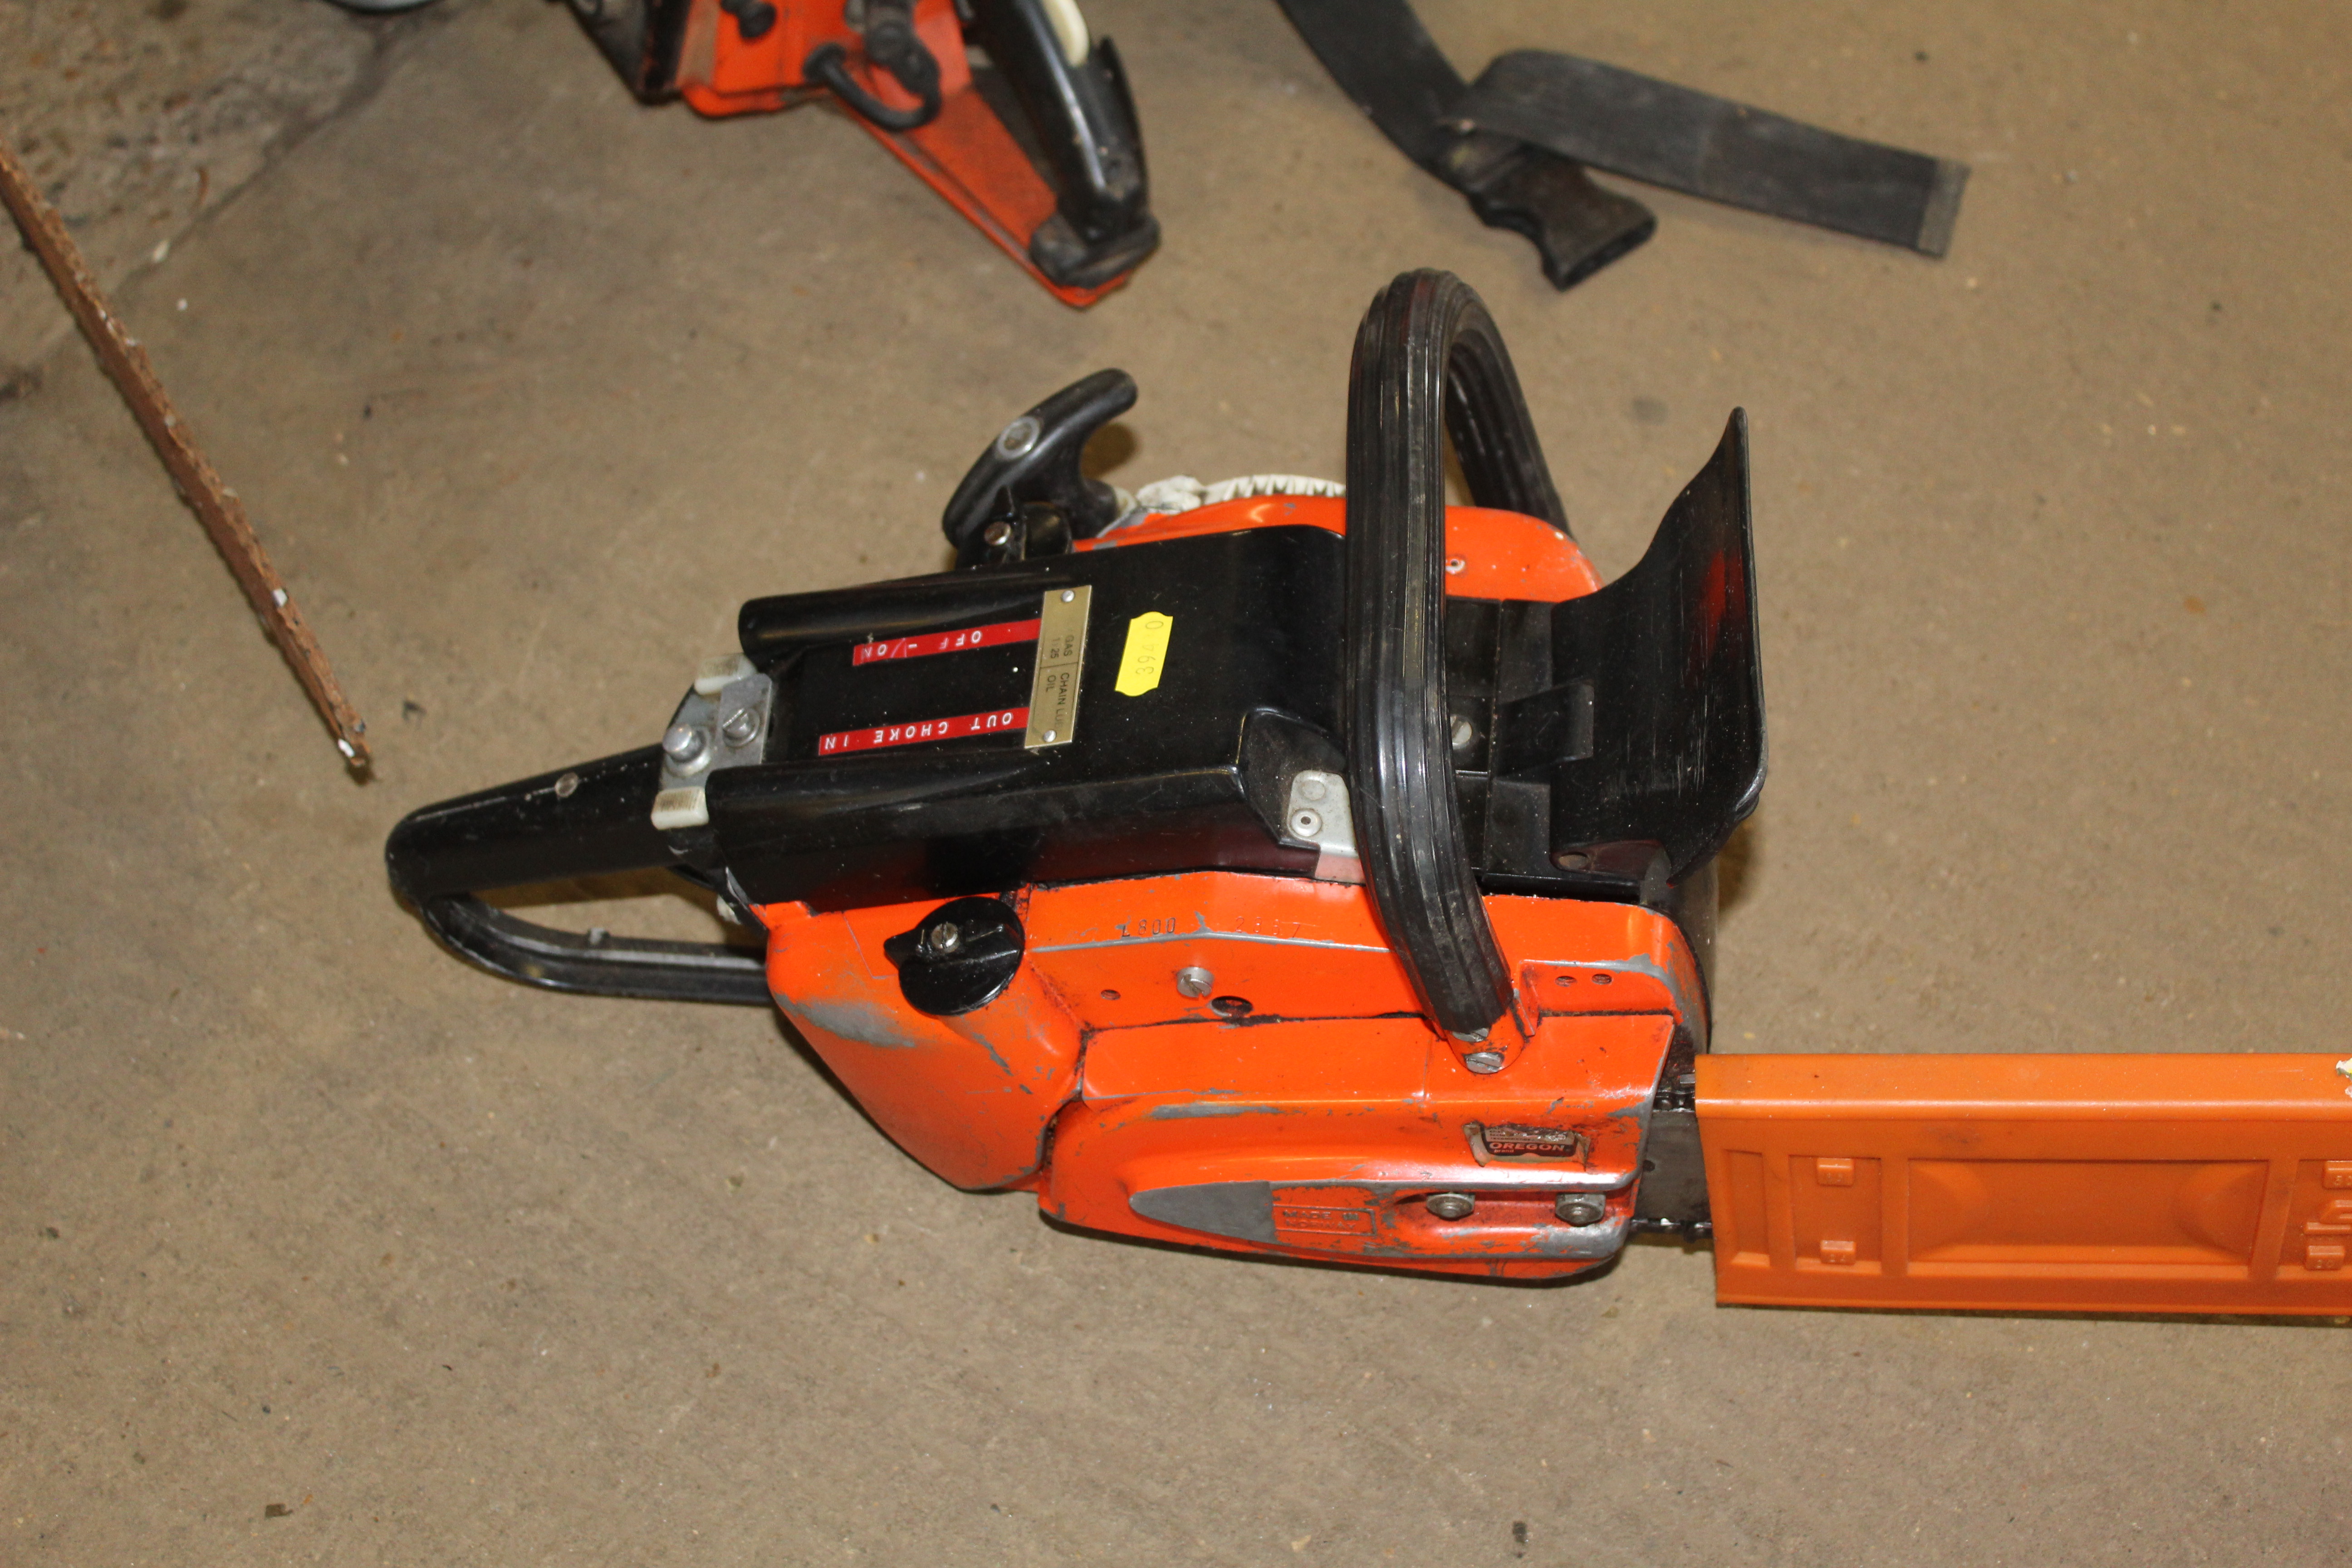 An Oregon petrol chainsaw - Image 3 of 3